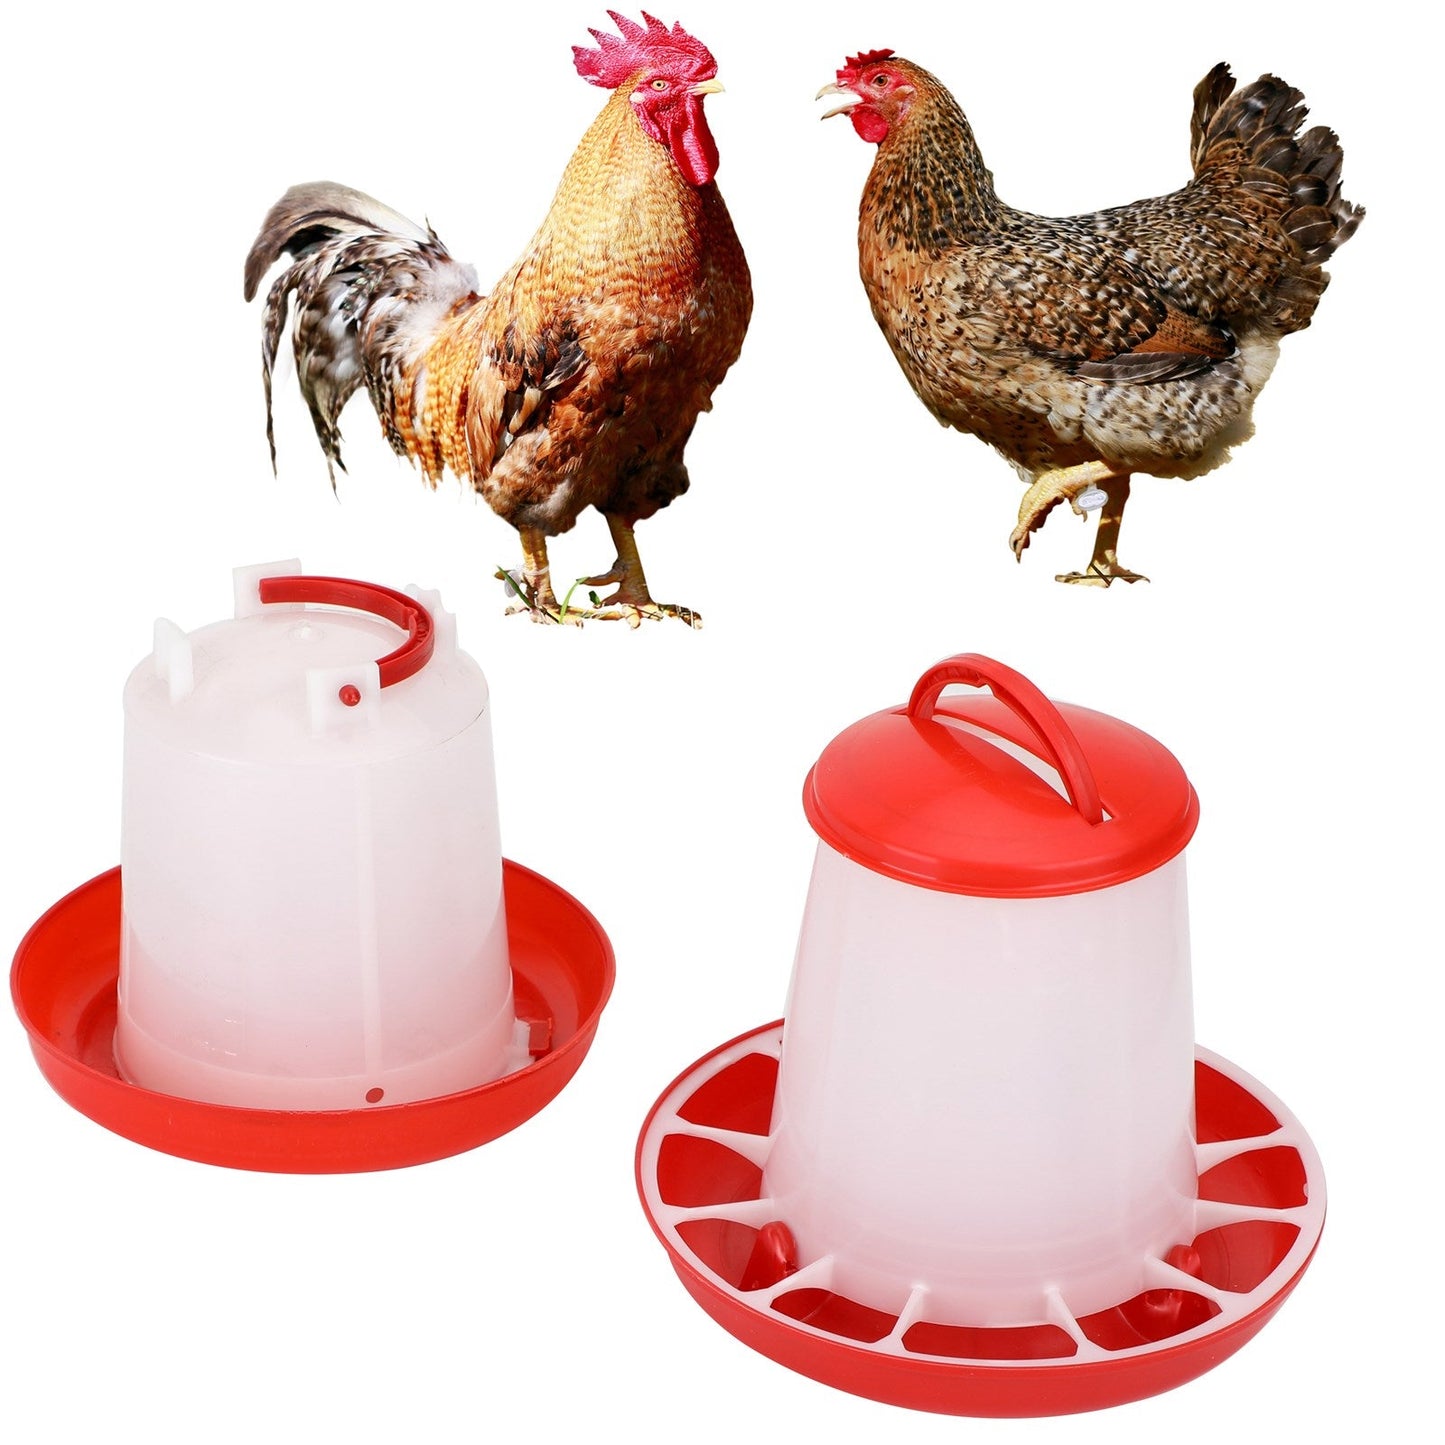 1.5kg Feeder & 1.5Ltr Drinker Chicken/Poultry/Hen Food And Water Accesories